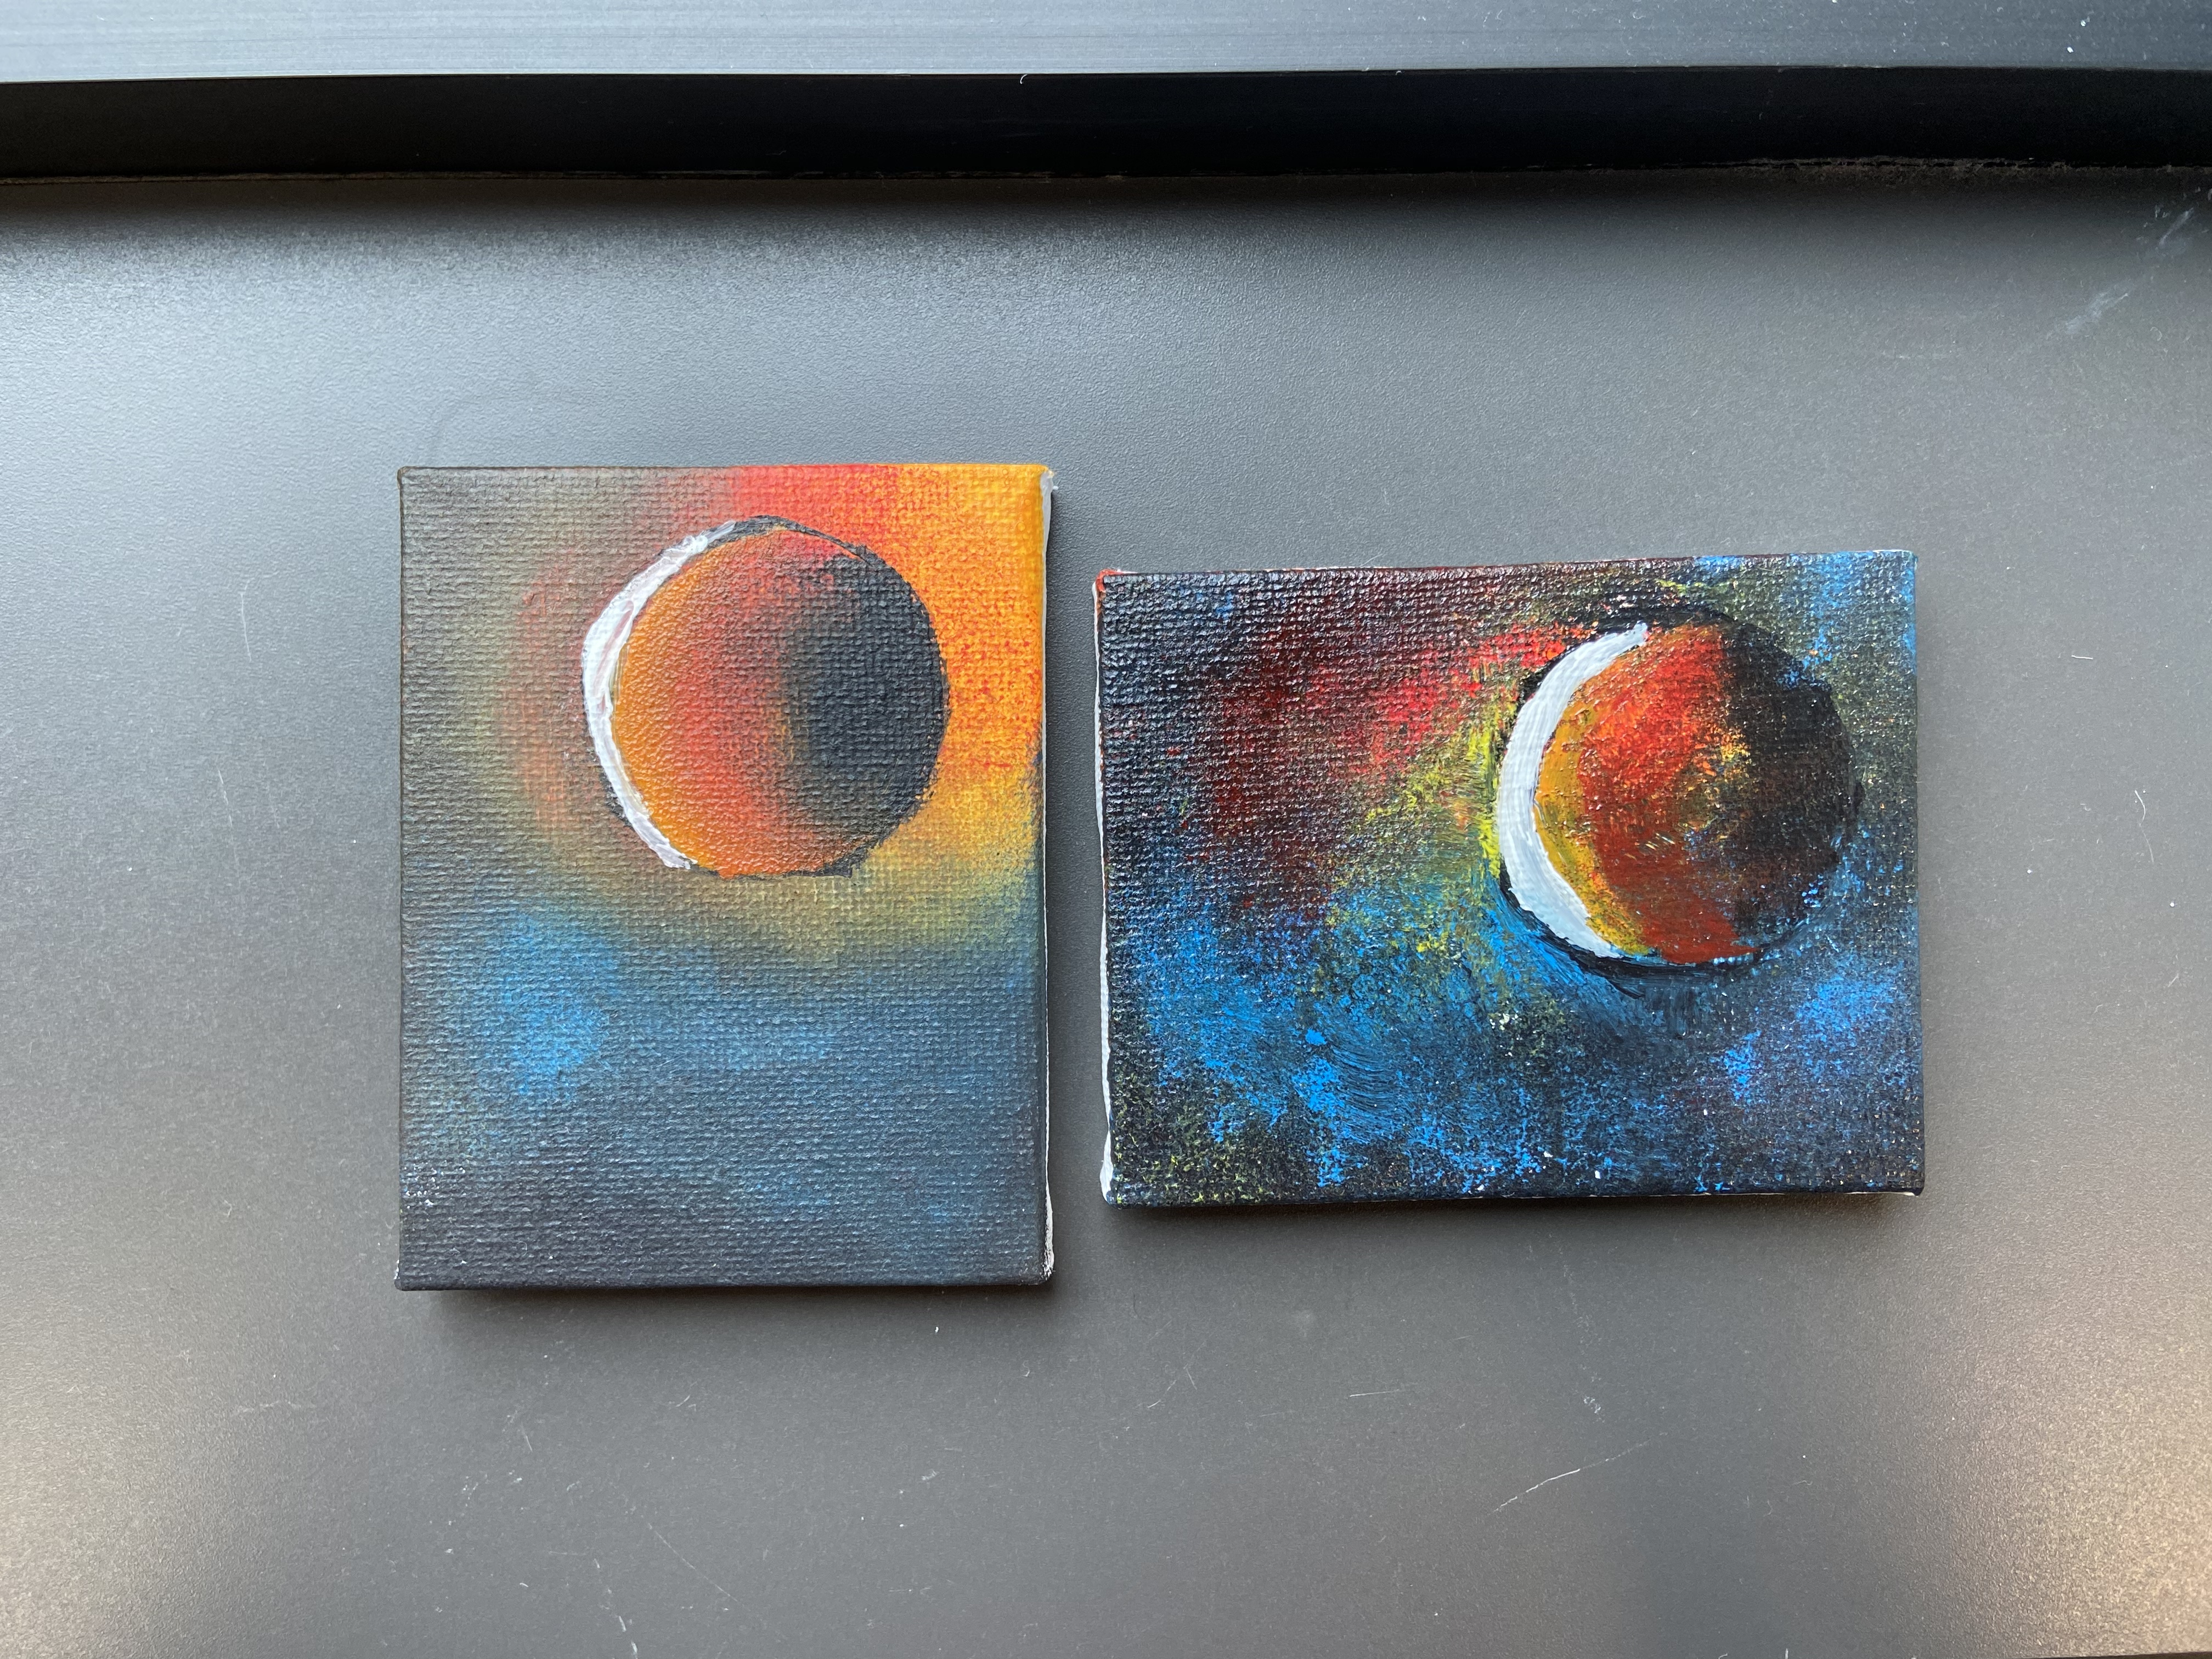 Two eclipse paintings over a black background.